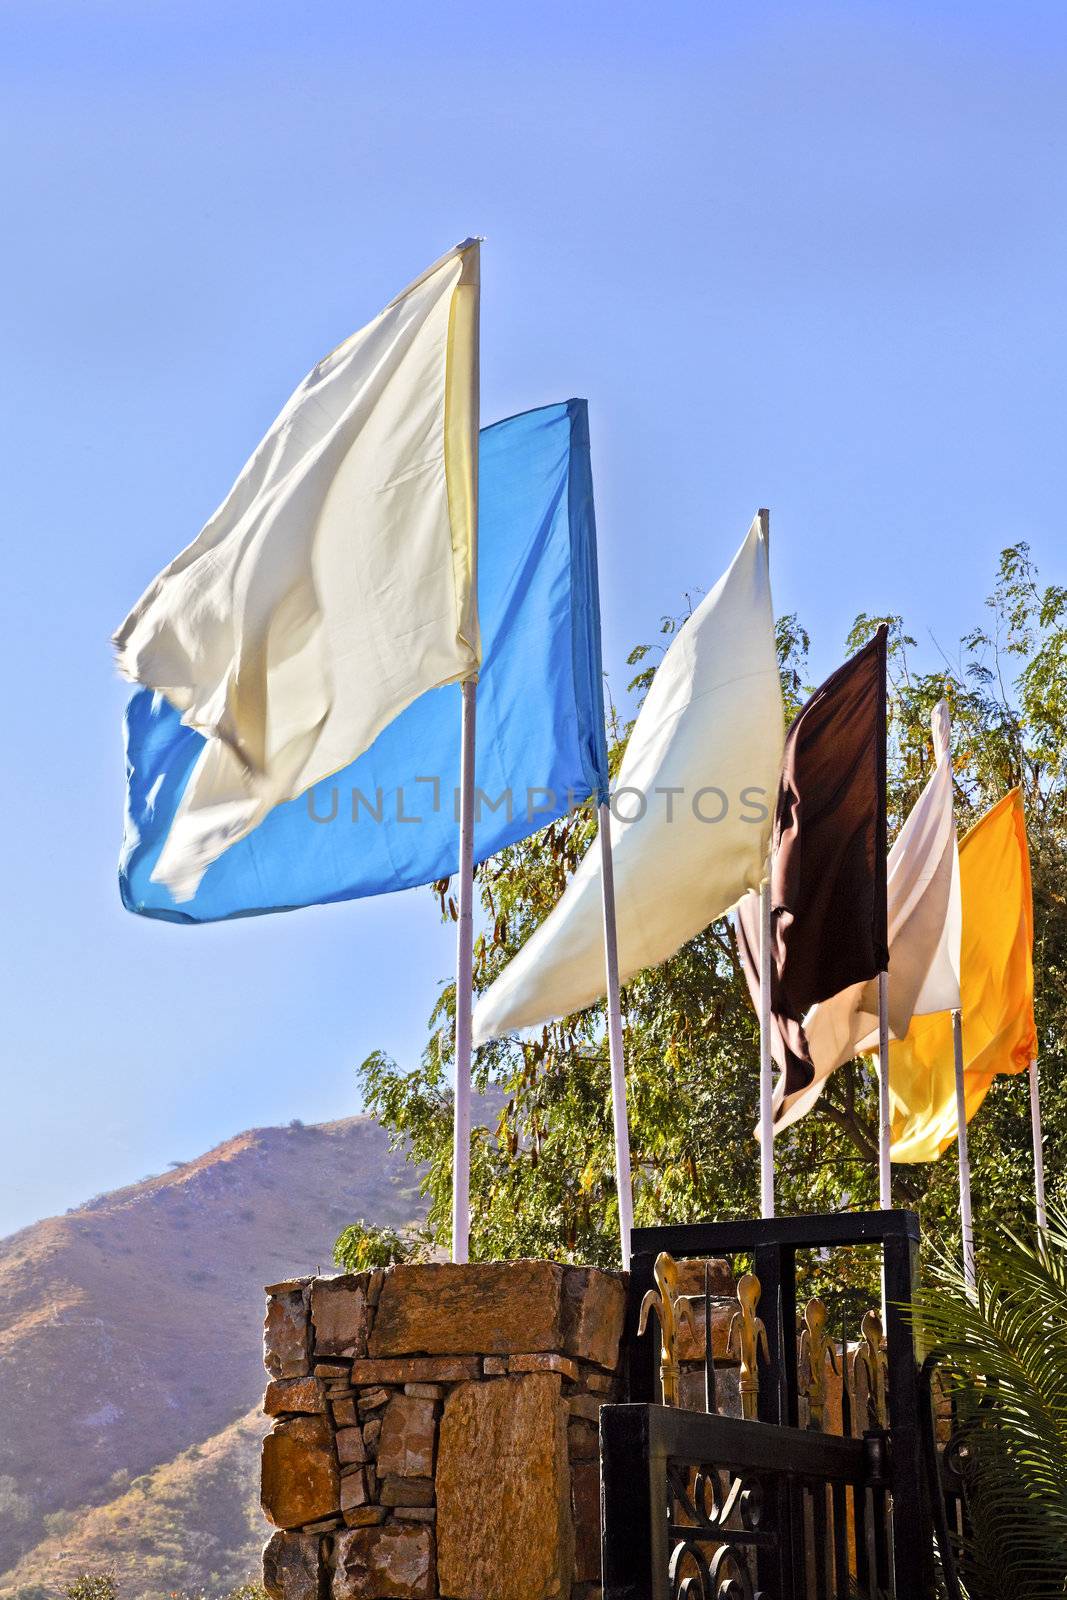 Generic portrait of a landscape incorporating plain multi coloured flags mounted on a stone wall at an entrance to a property. Location of shot was Rajasthan, India